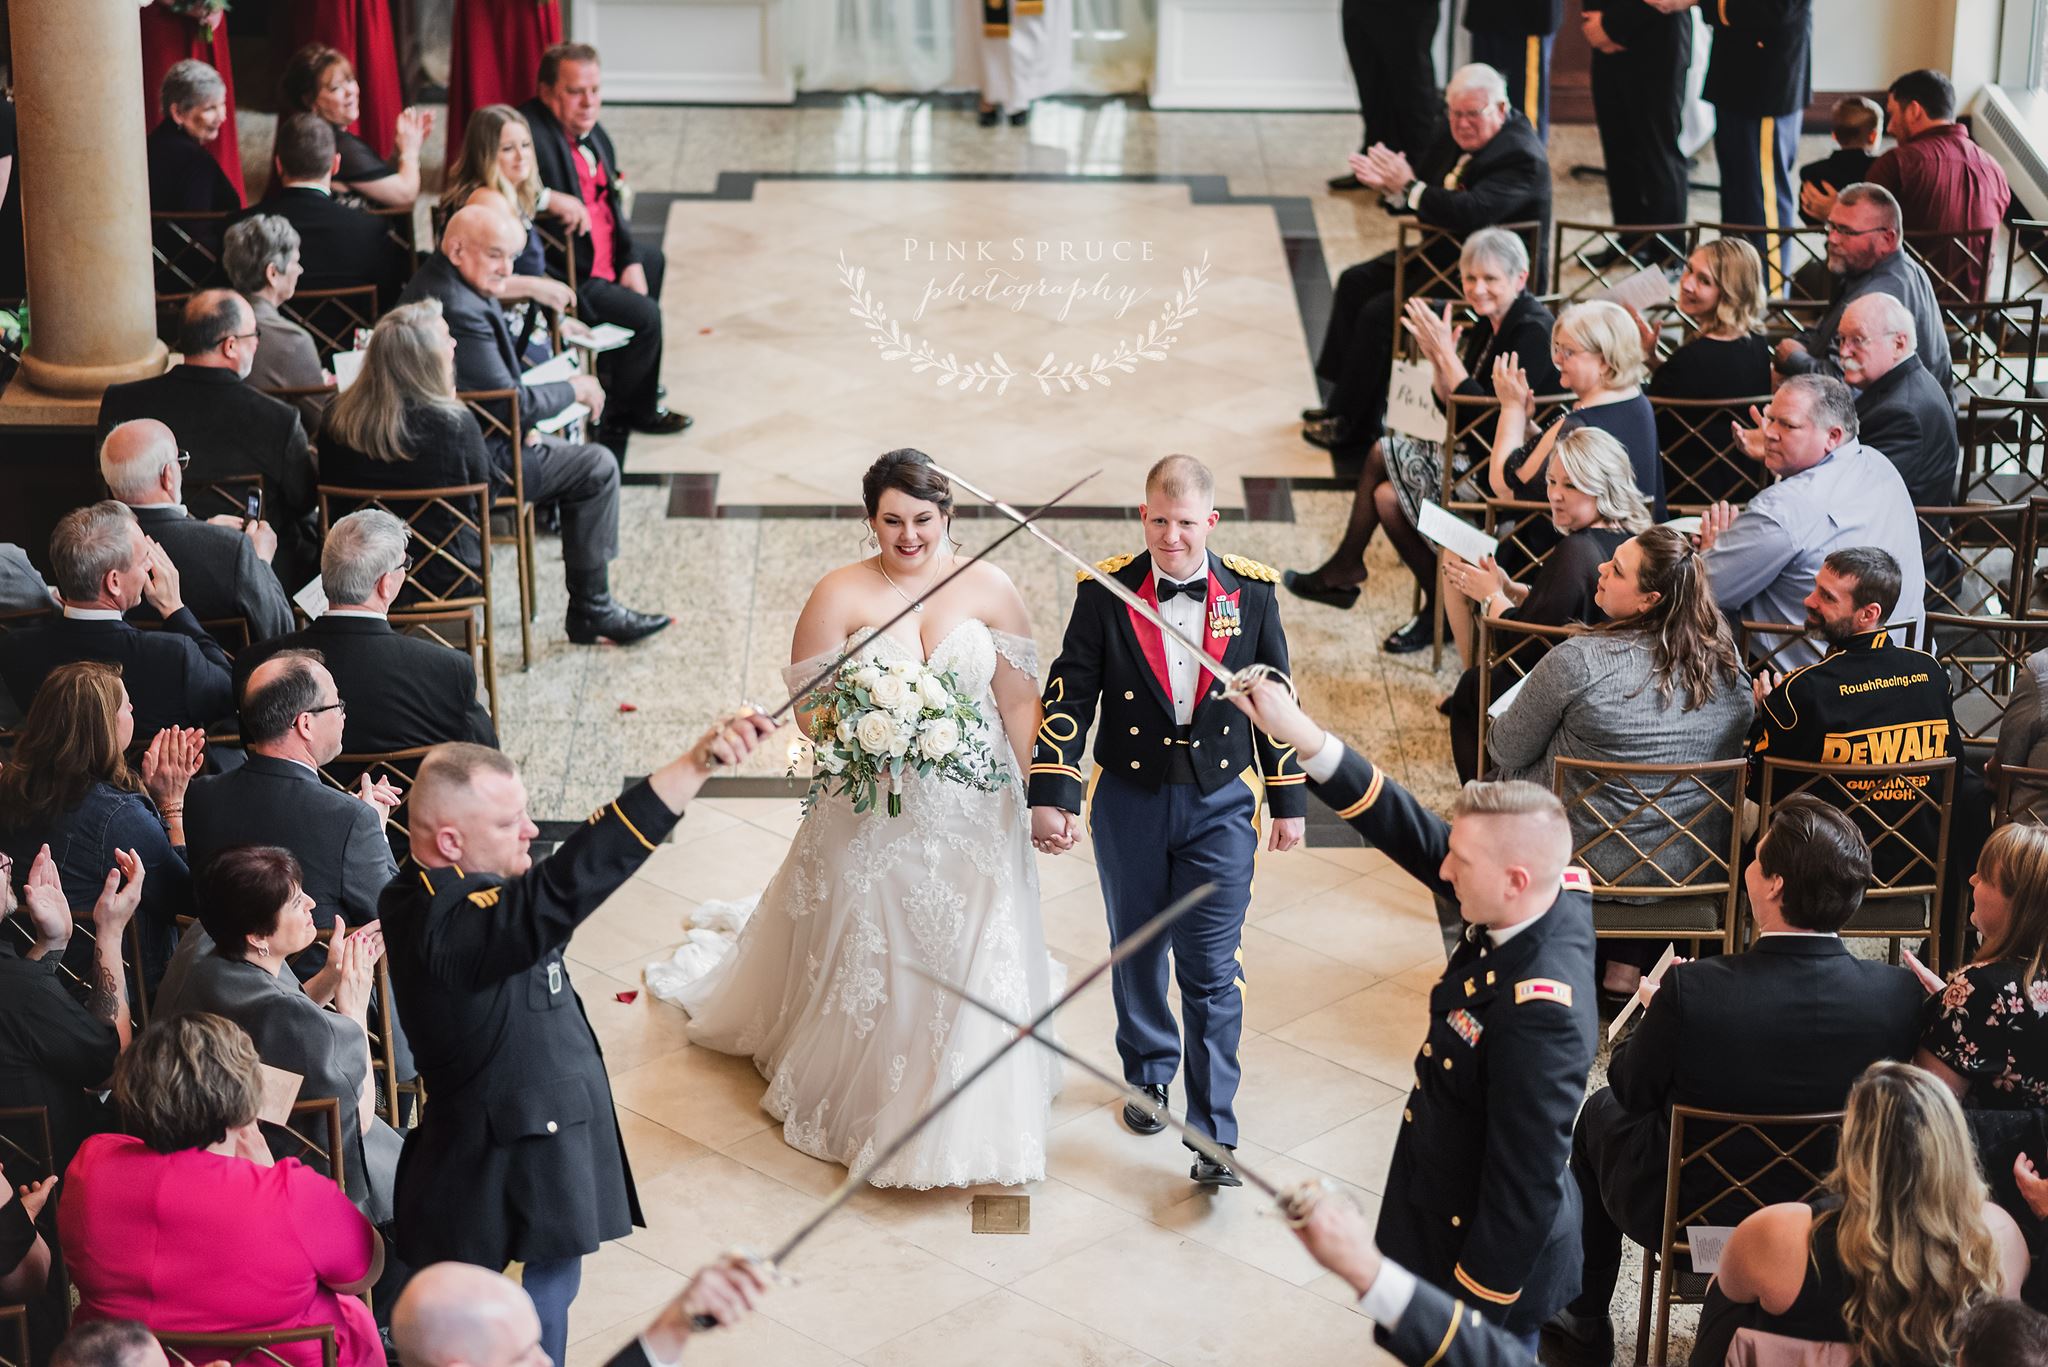 Elegant Red, White, and Blue Military Wedding at The Cargill Room in The Waterfront Restaurant La Crosse, WI | © Pink Spruce Photography | www.pinksprucephotography.com